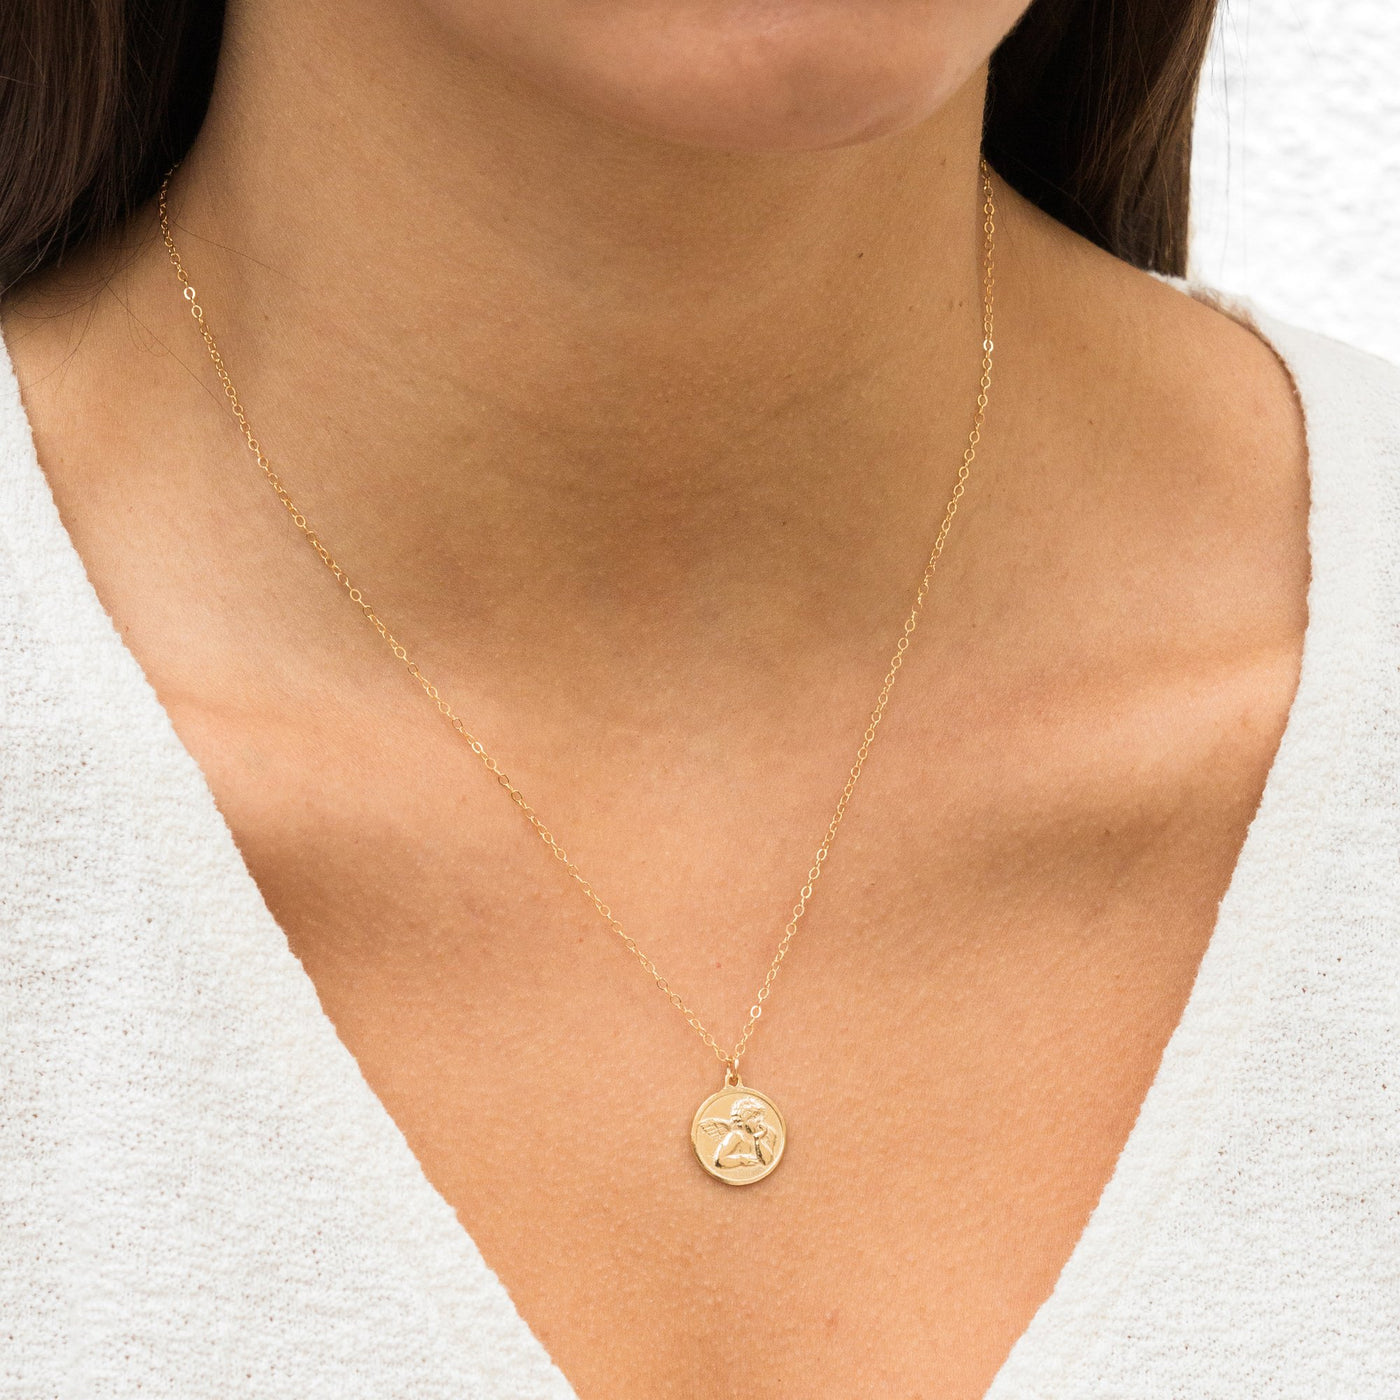 Angel Medallion Necklace | Simple & Dainty Jewelry